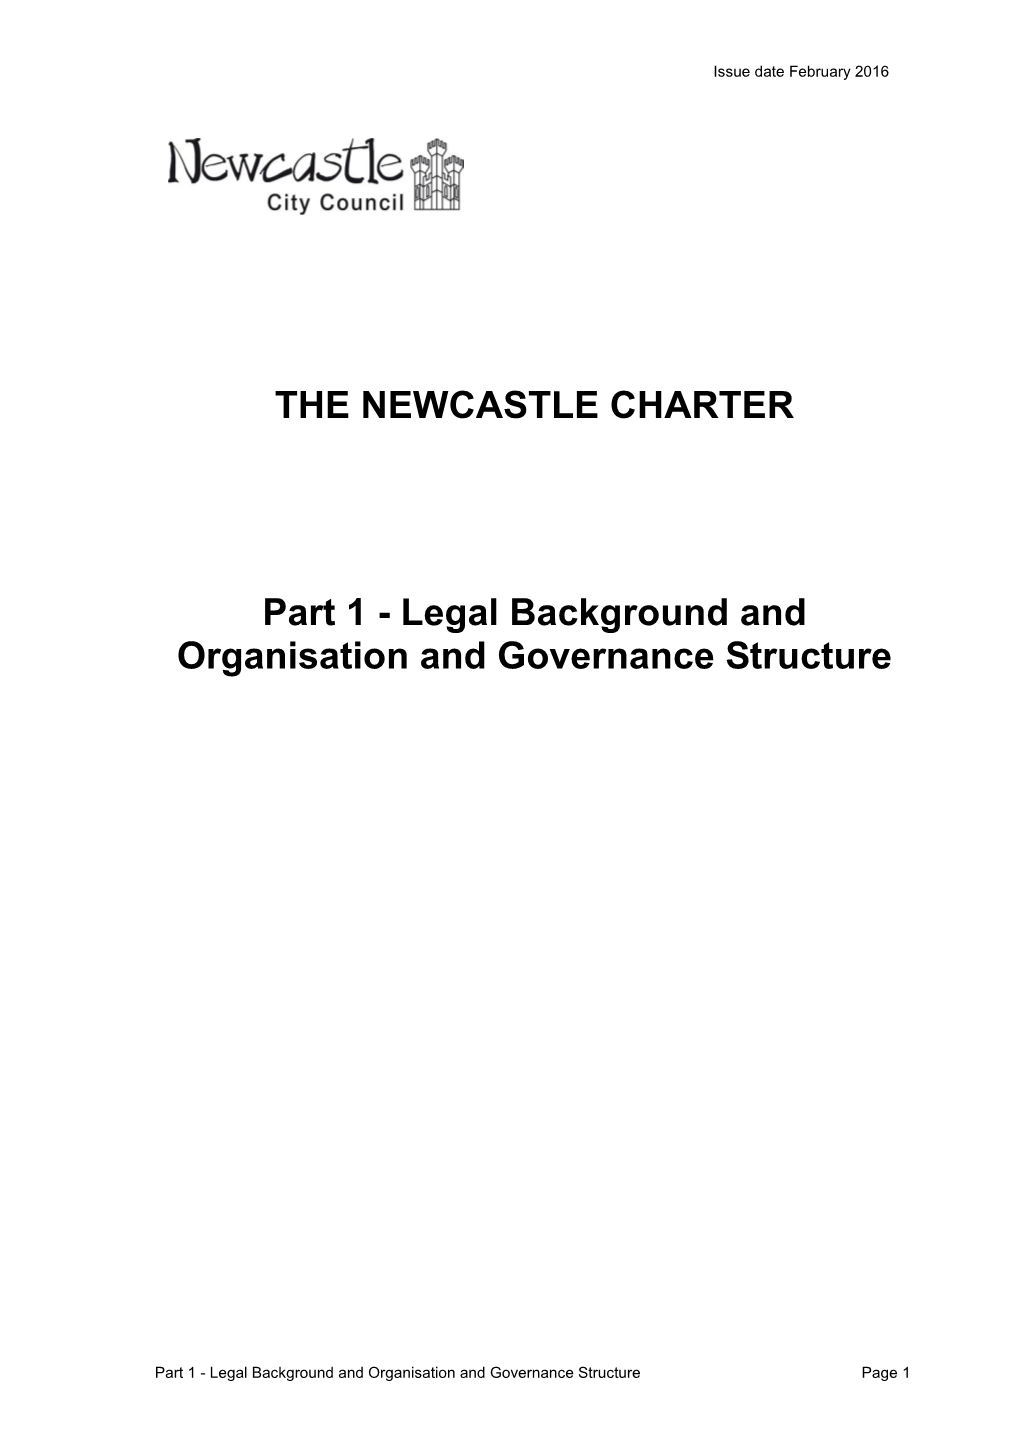 Legal Background and Organisation and Governance Structure